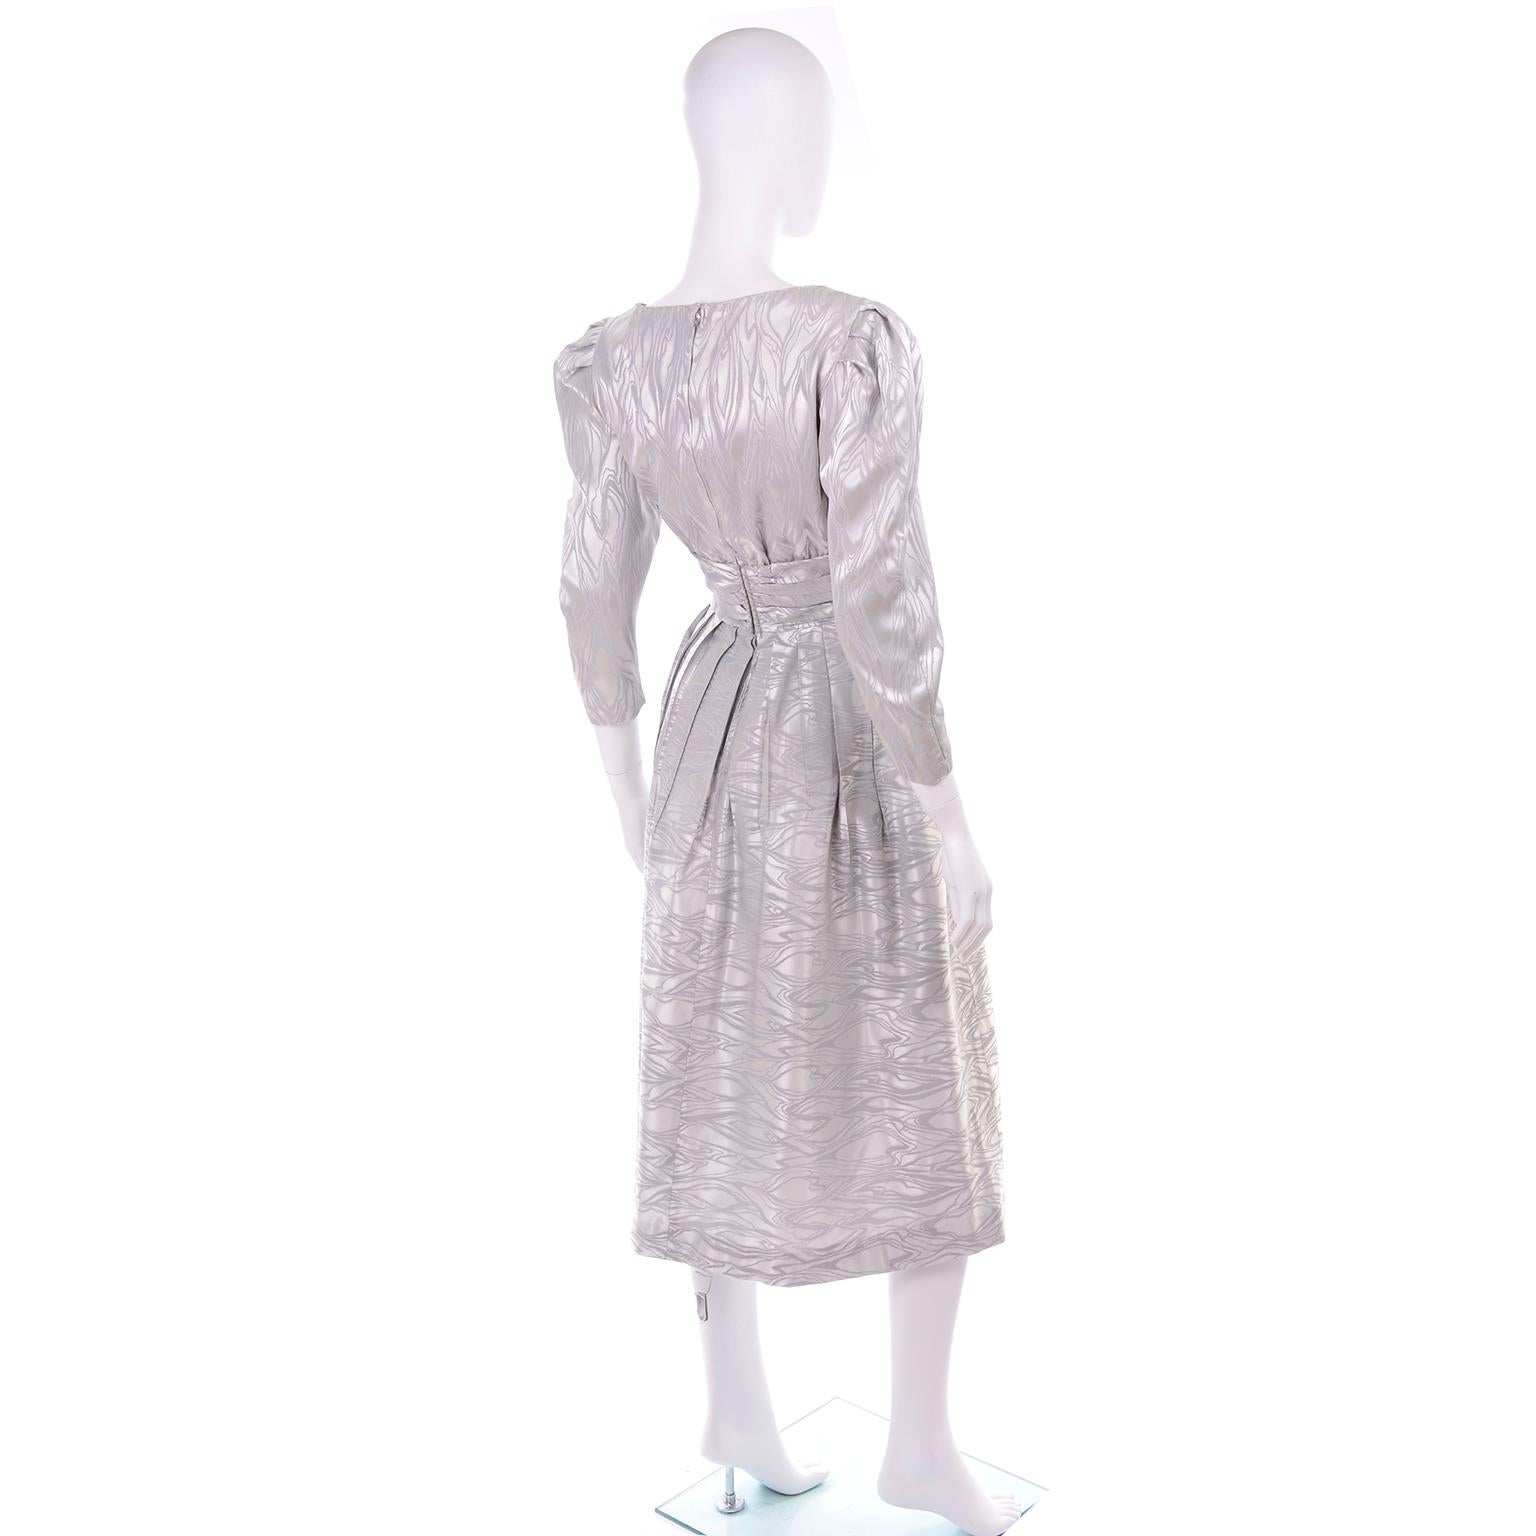 Women's 1980s A J Bari Vintage Silver Evening Dress w Puffed Gathered Sleeves & Pockets For Sale